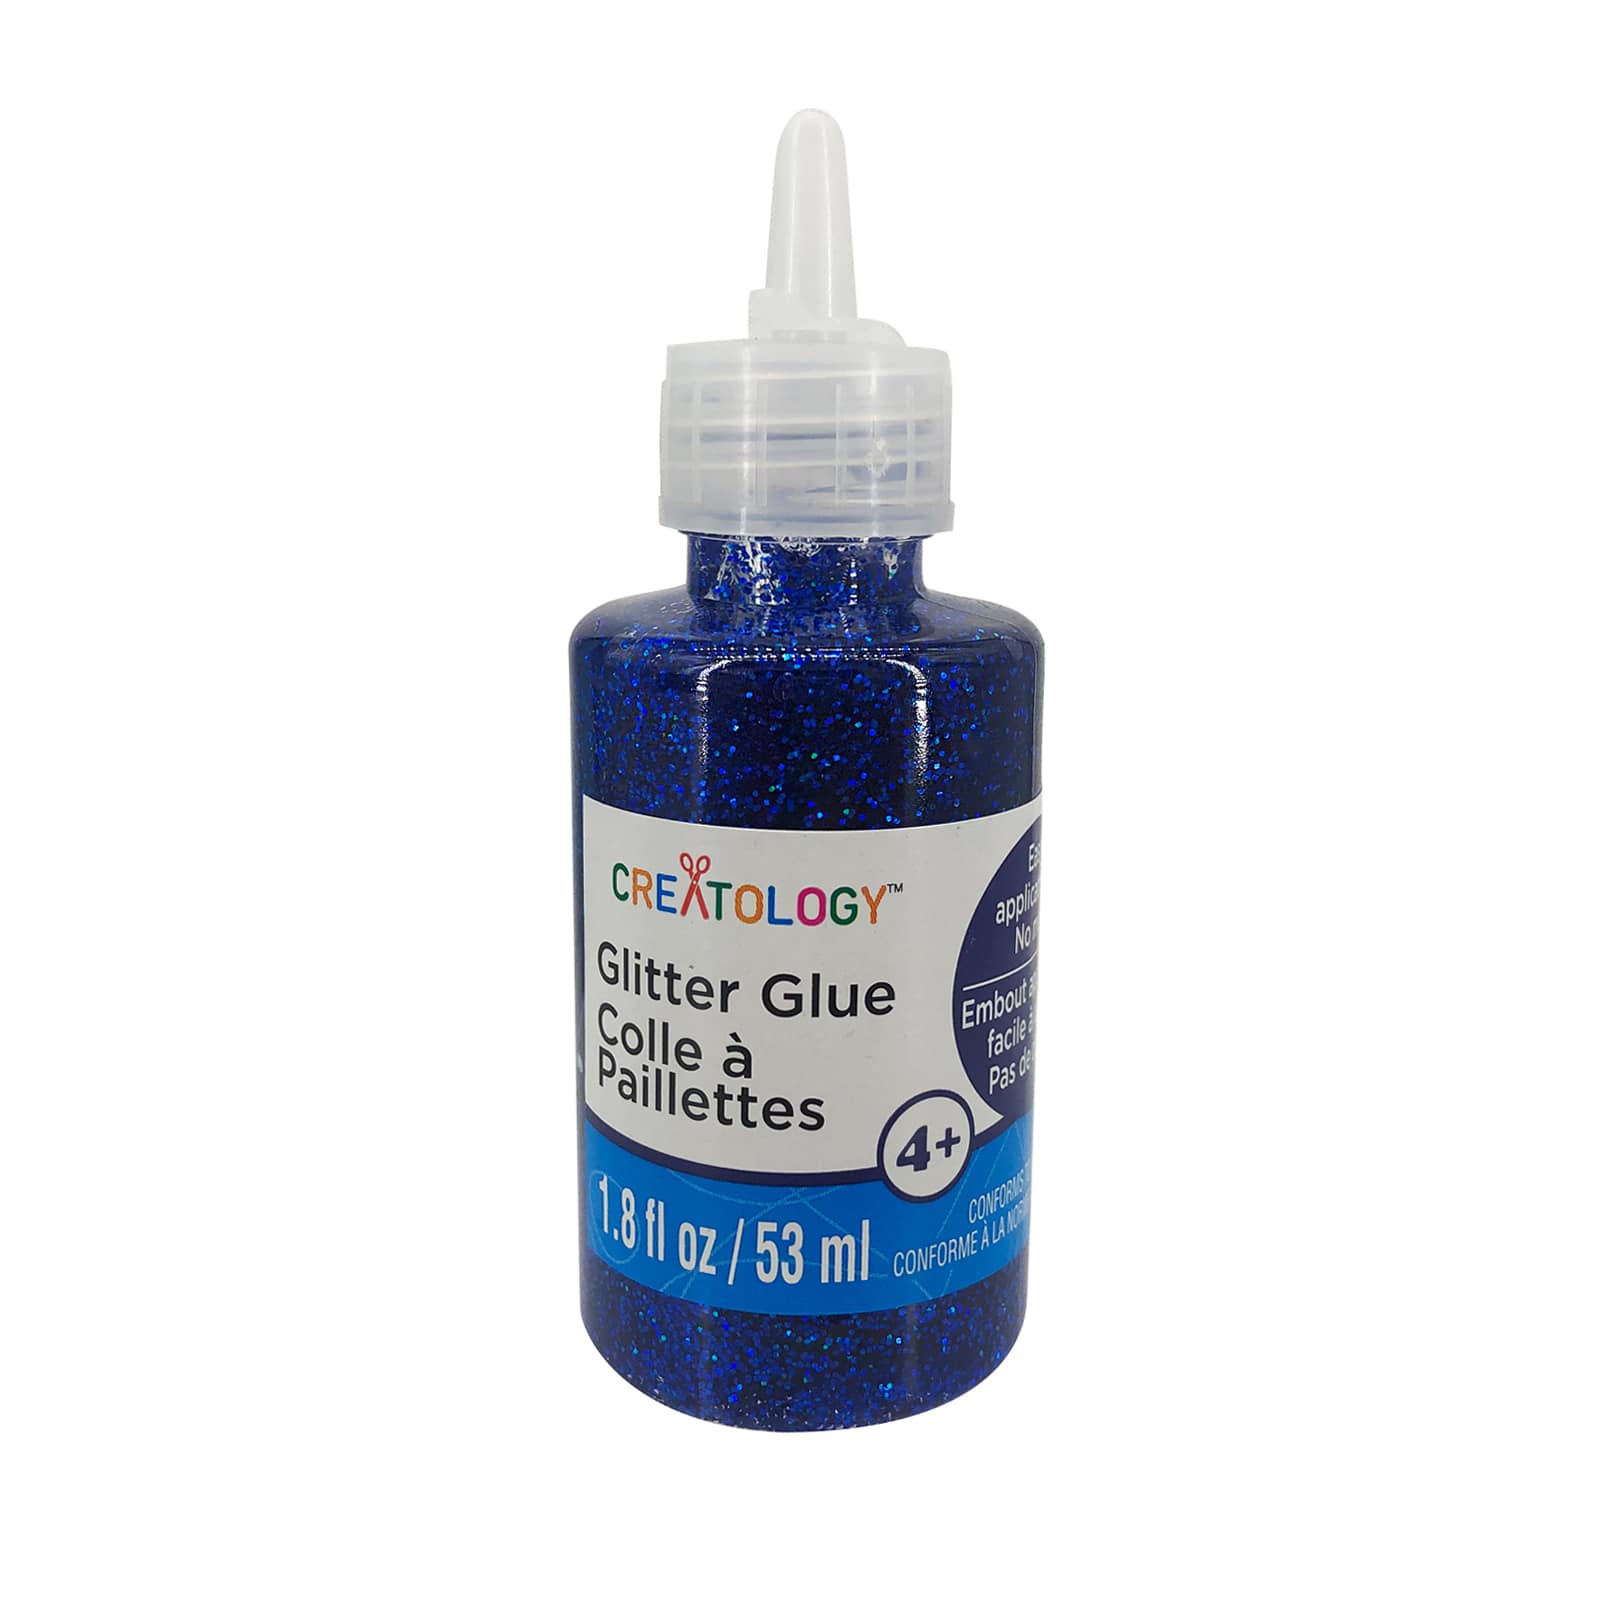 24 Packs: 6 ct. (144 Total) Primary Glitter Glue Pens by Creatology™